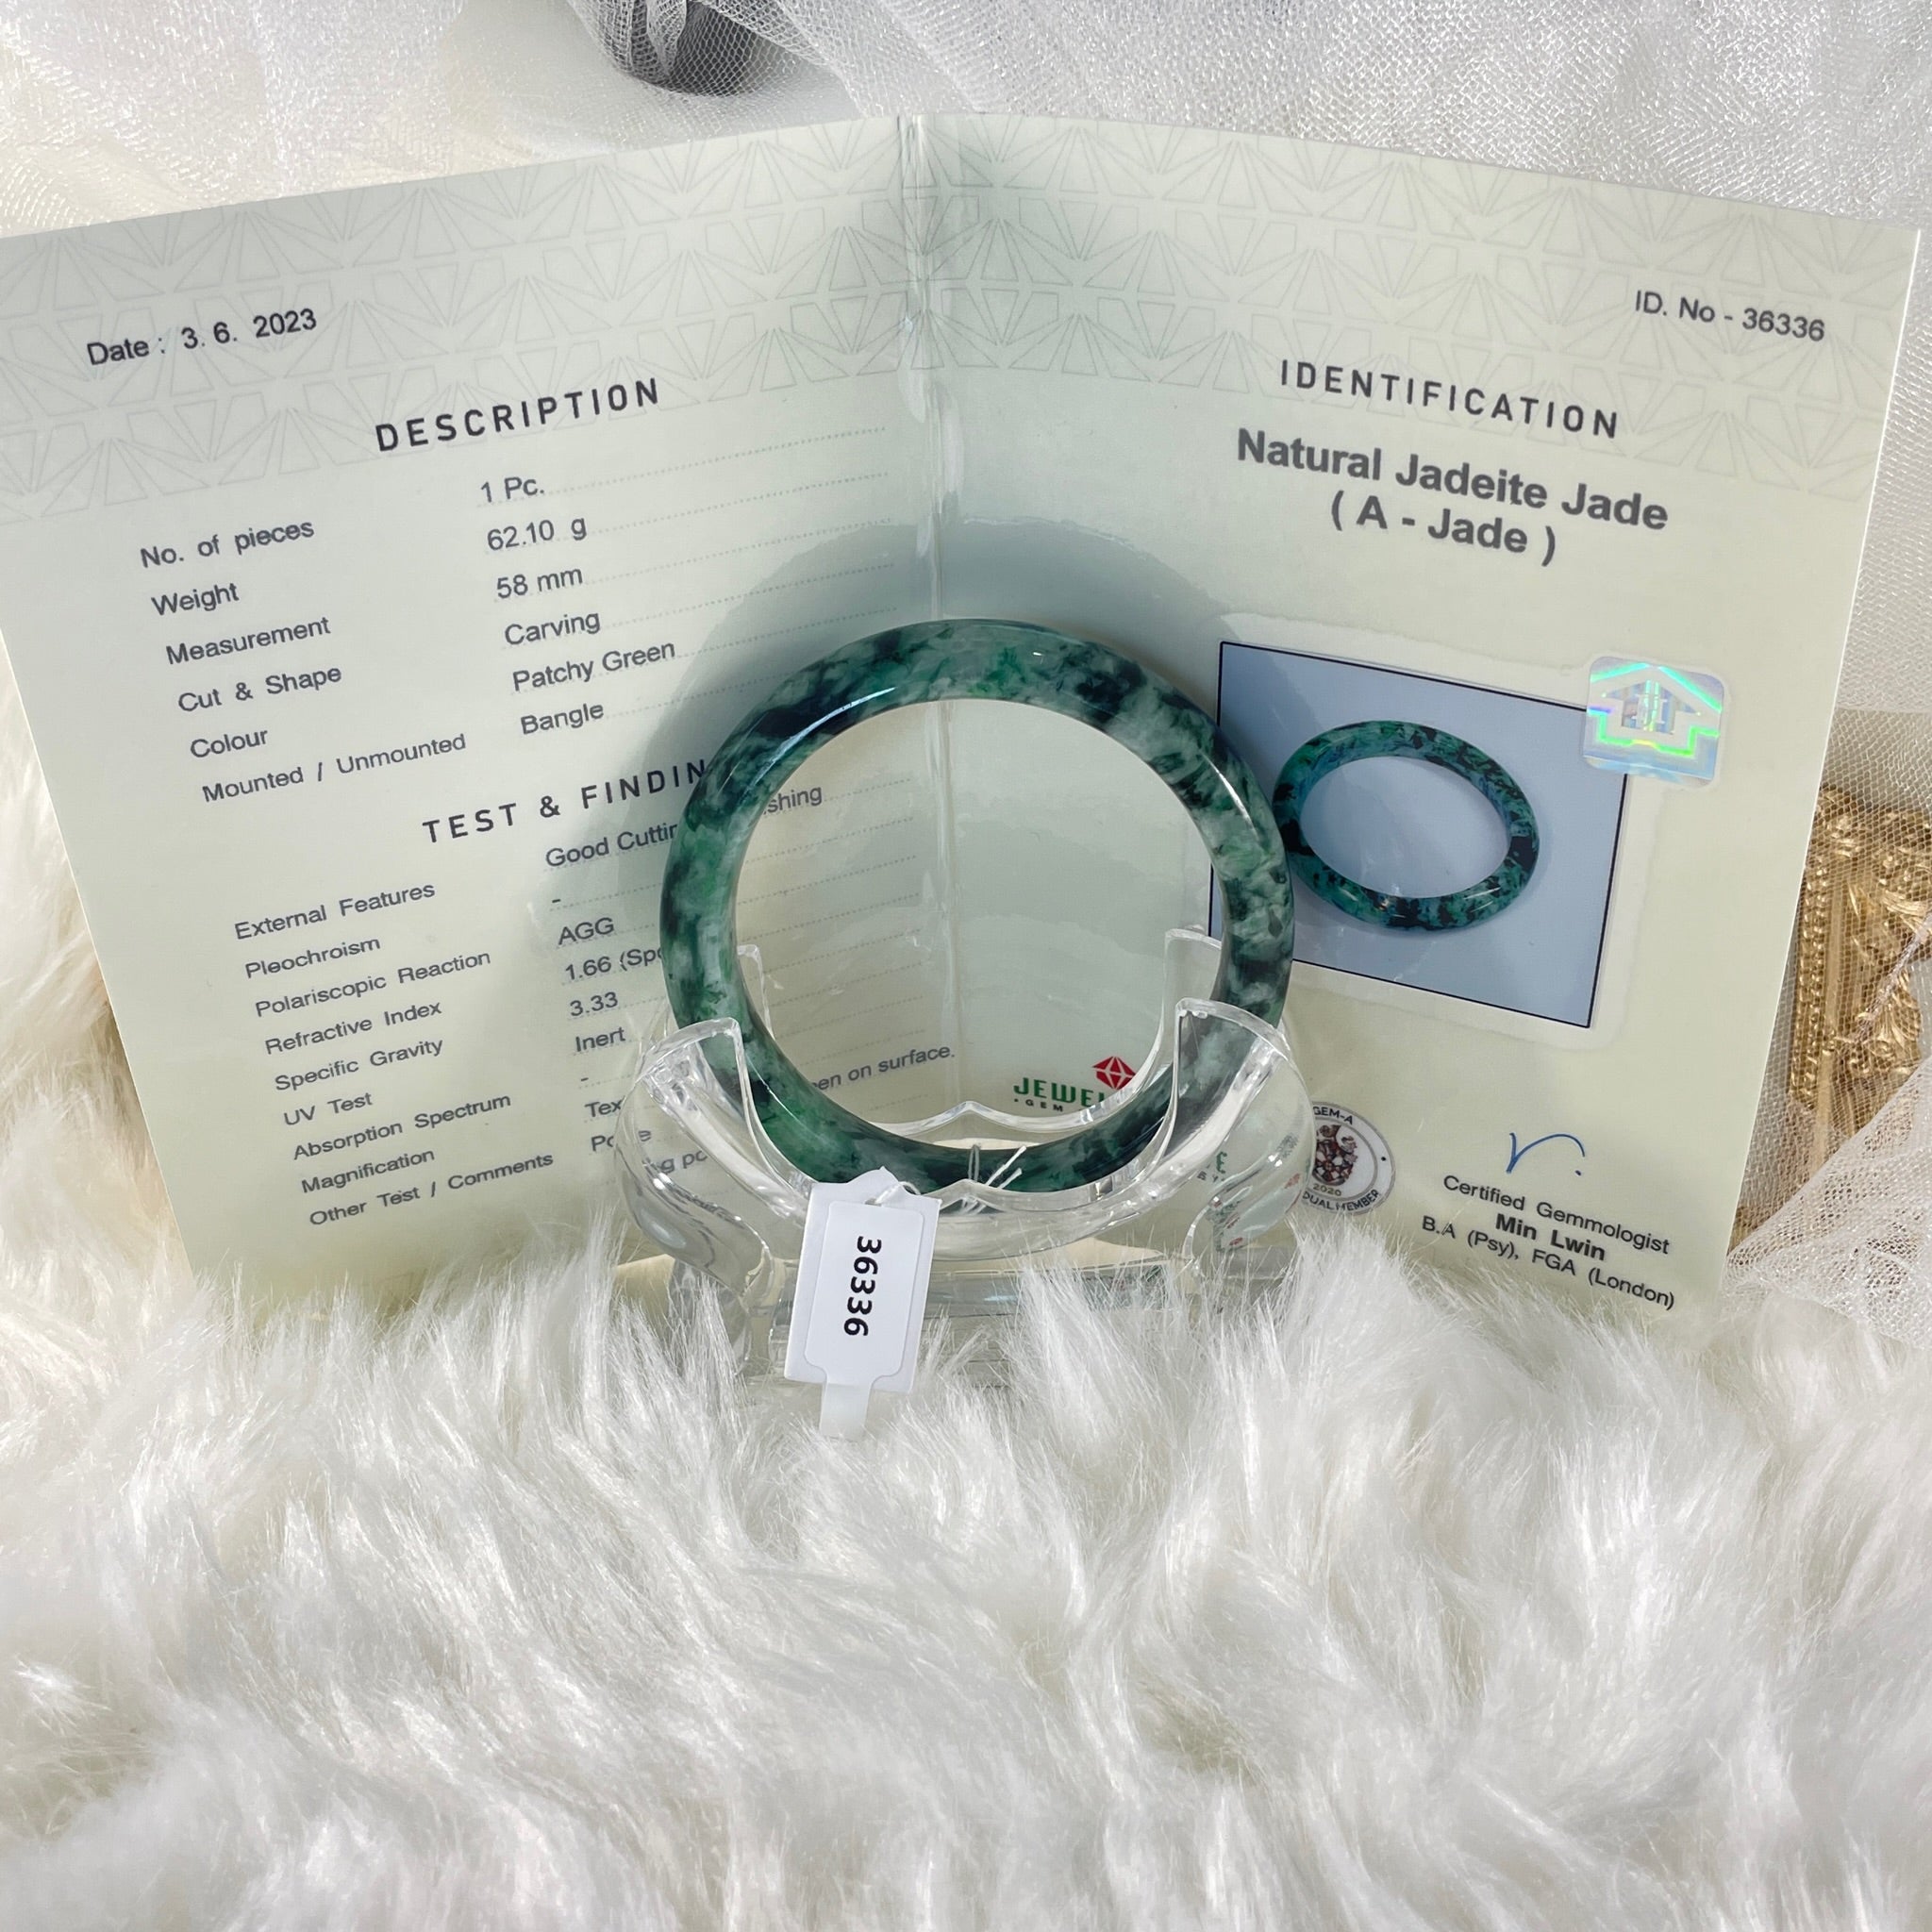 Grade A Natural Jade Bangle with certificate #36336